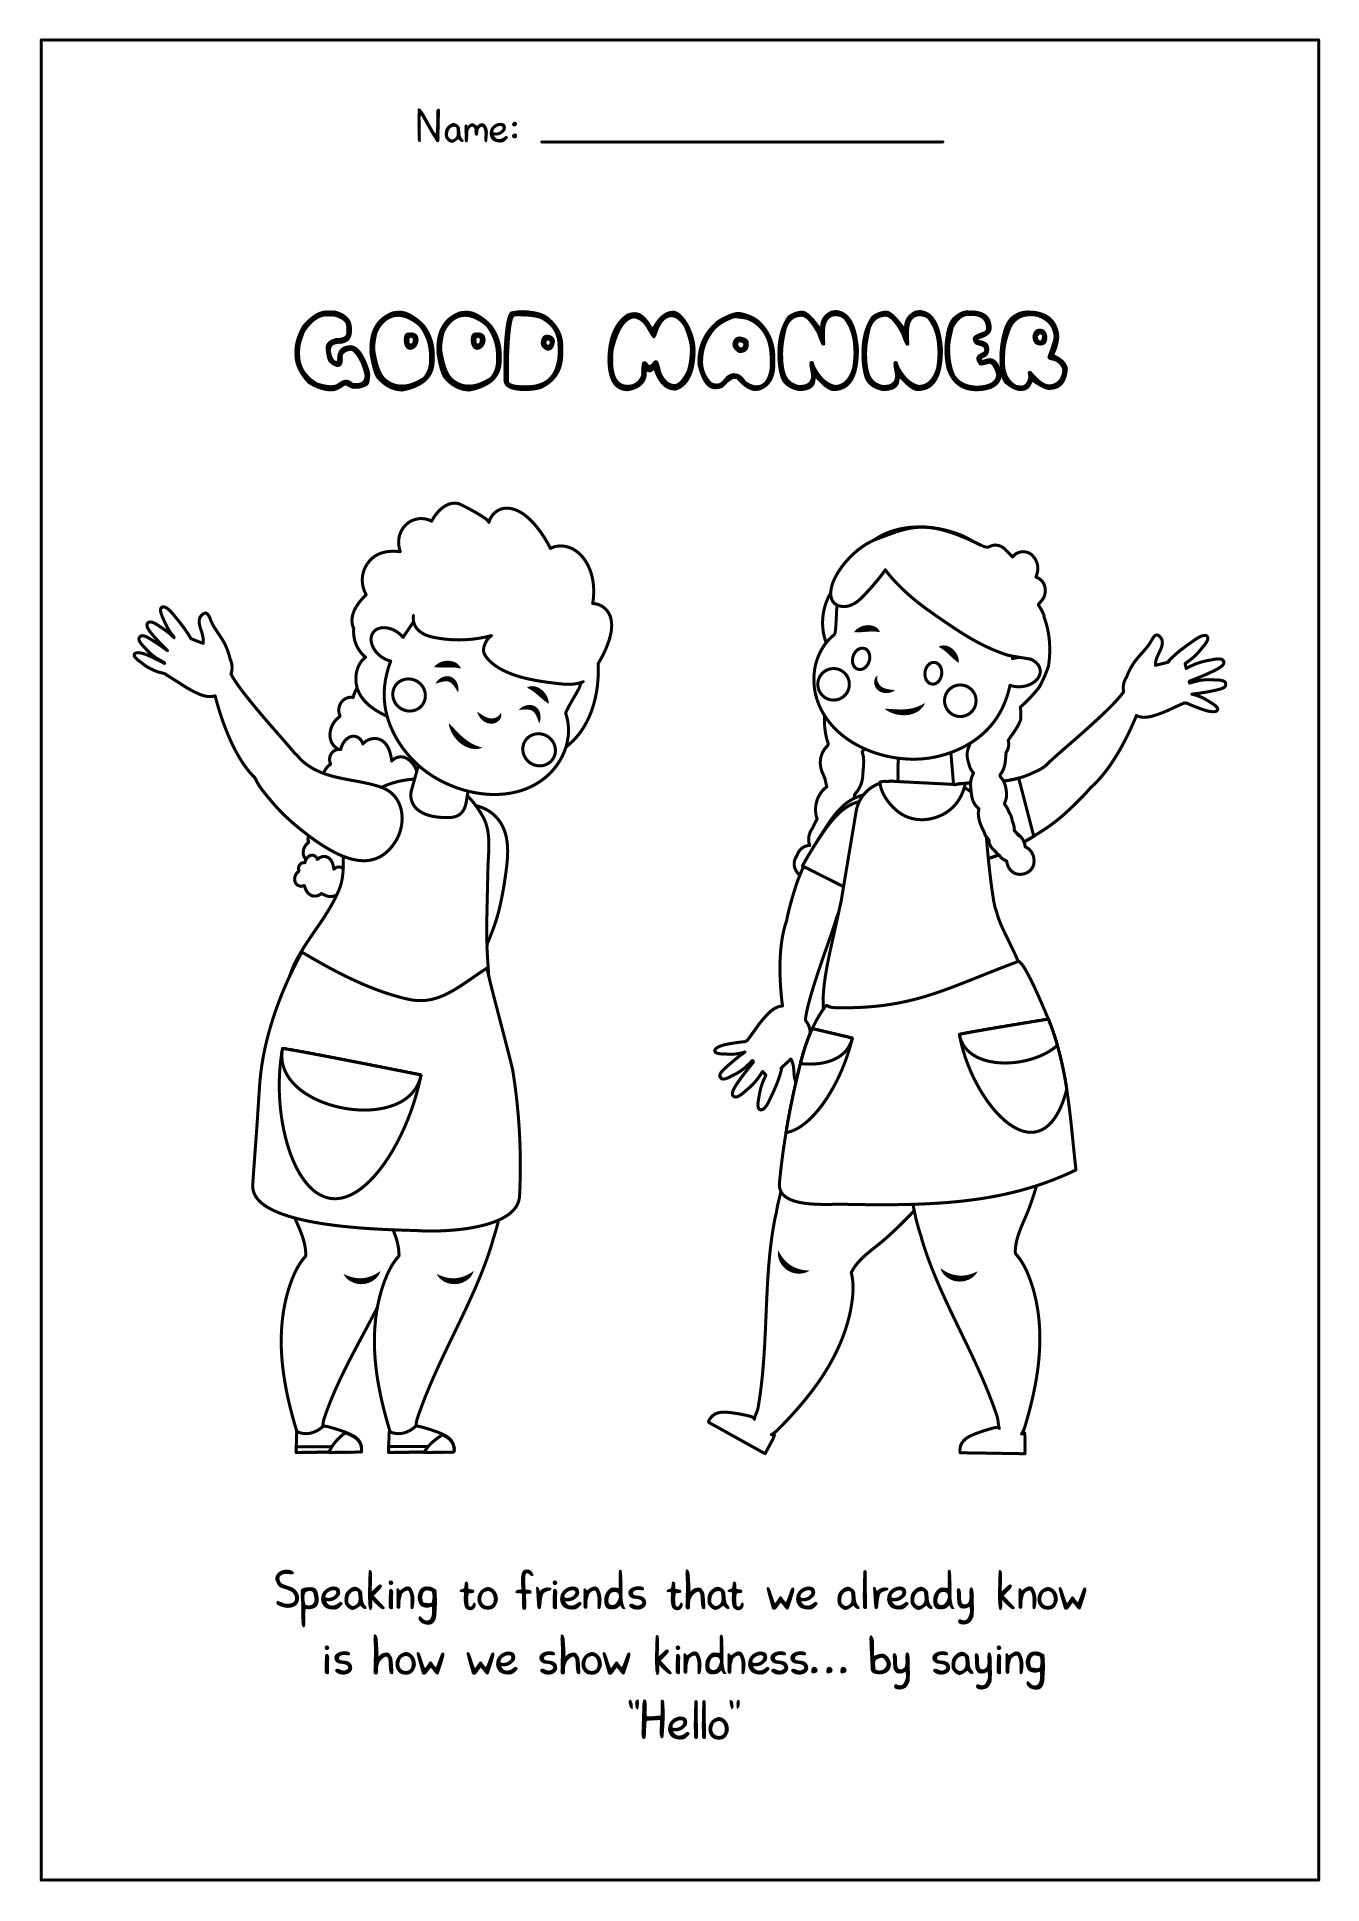 10 Best Preschool Manners Coloring Pages Printable